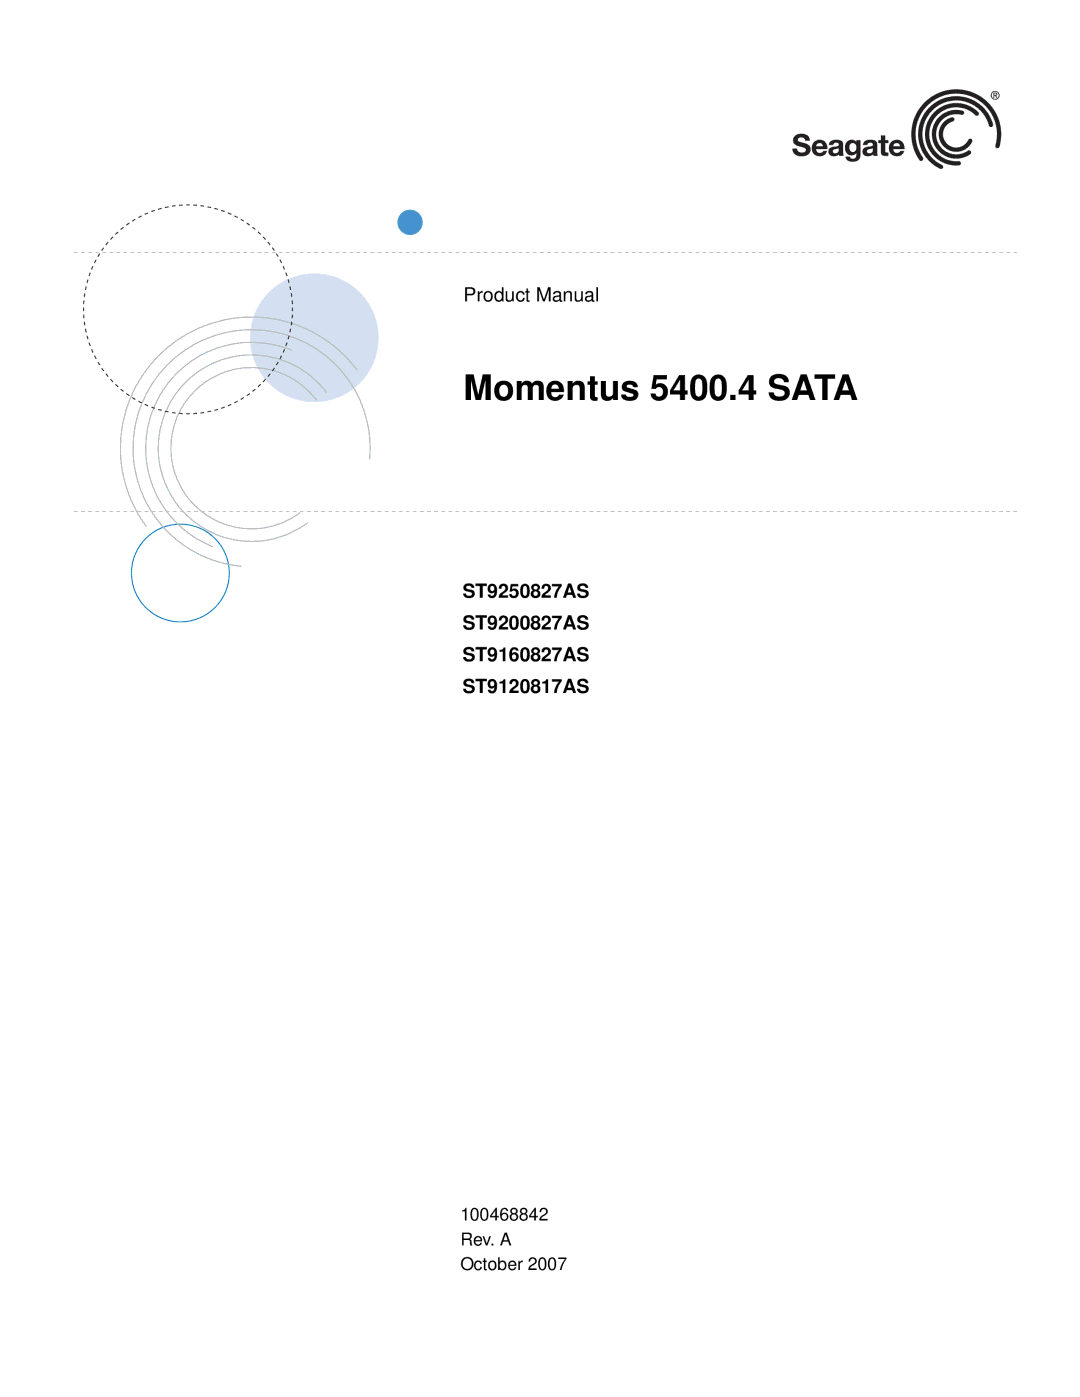 Seagate manual Momentus 5400.4 Sata, ST9250827AS ST9200827AS ST9160827AS ST9120817AS 